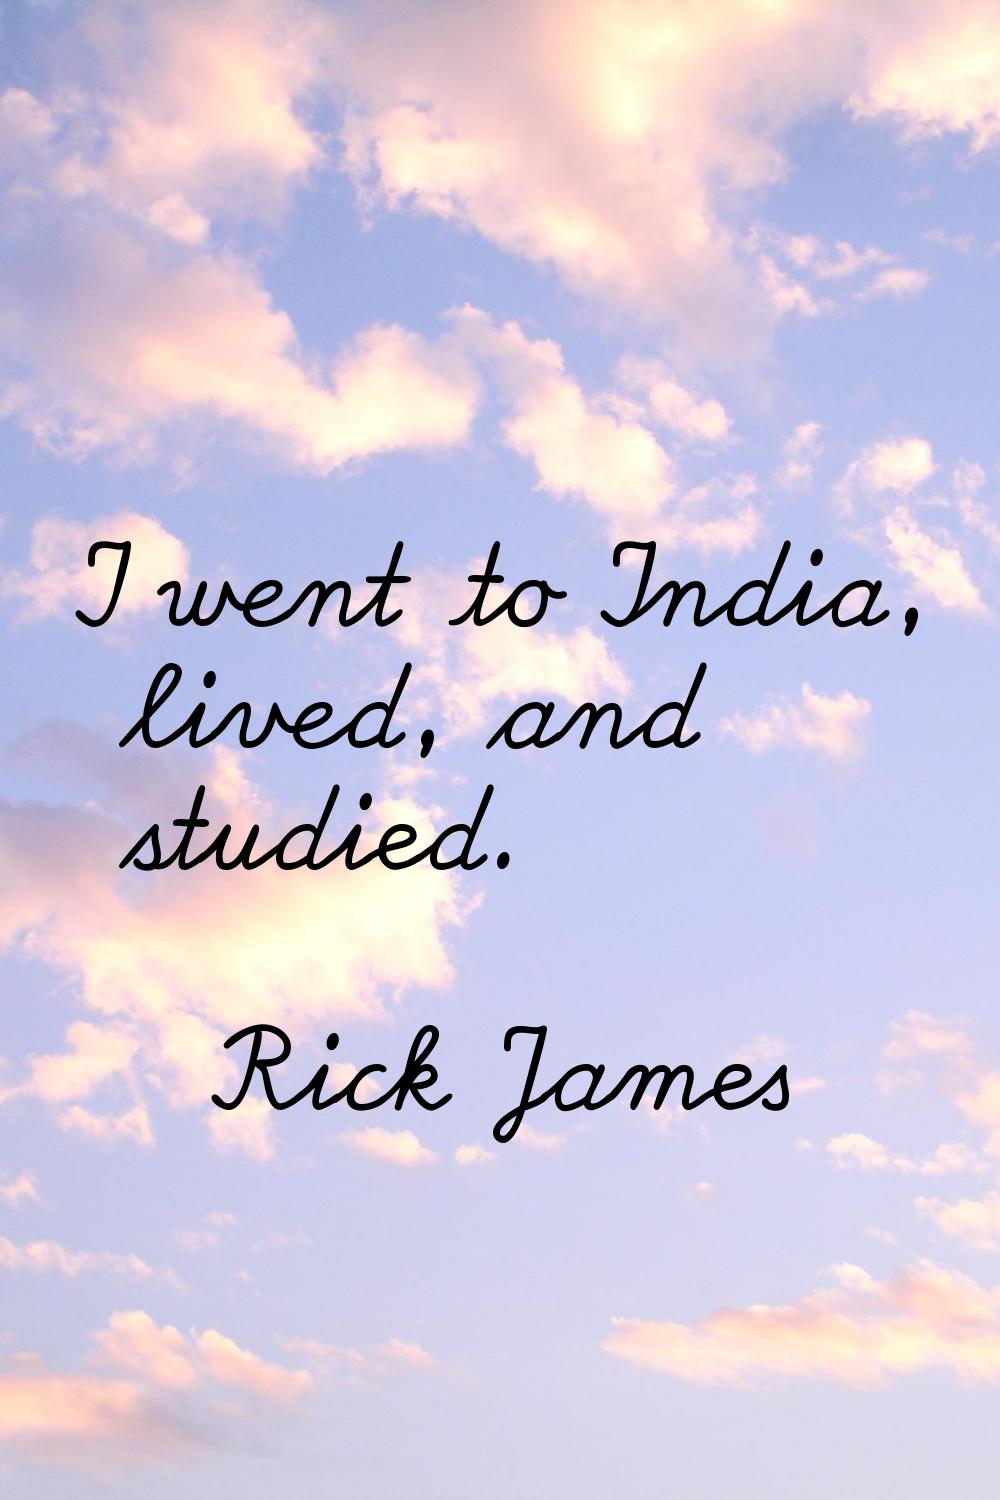 I went to India, lived, and studied.